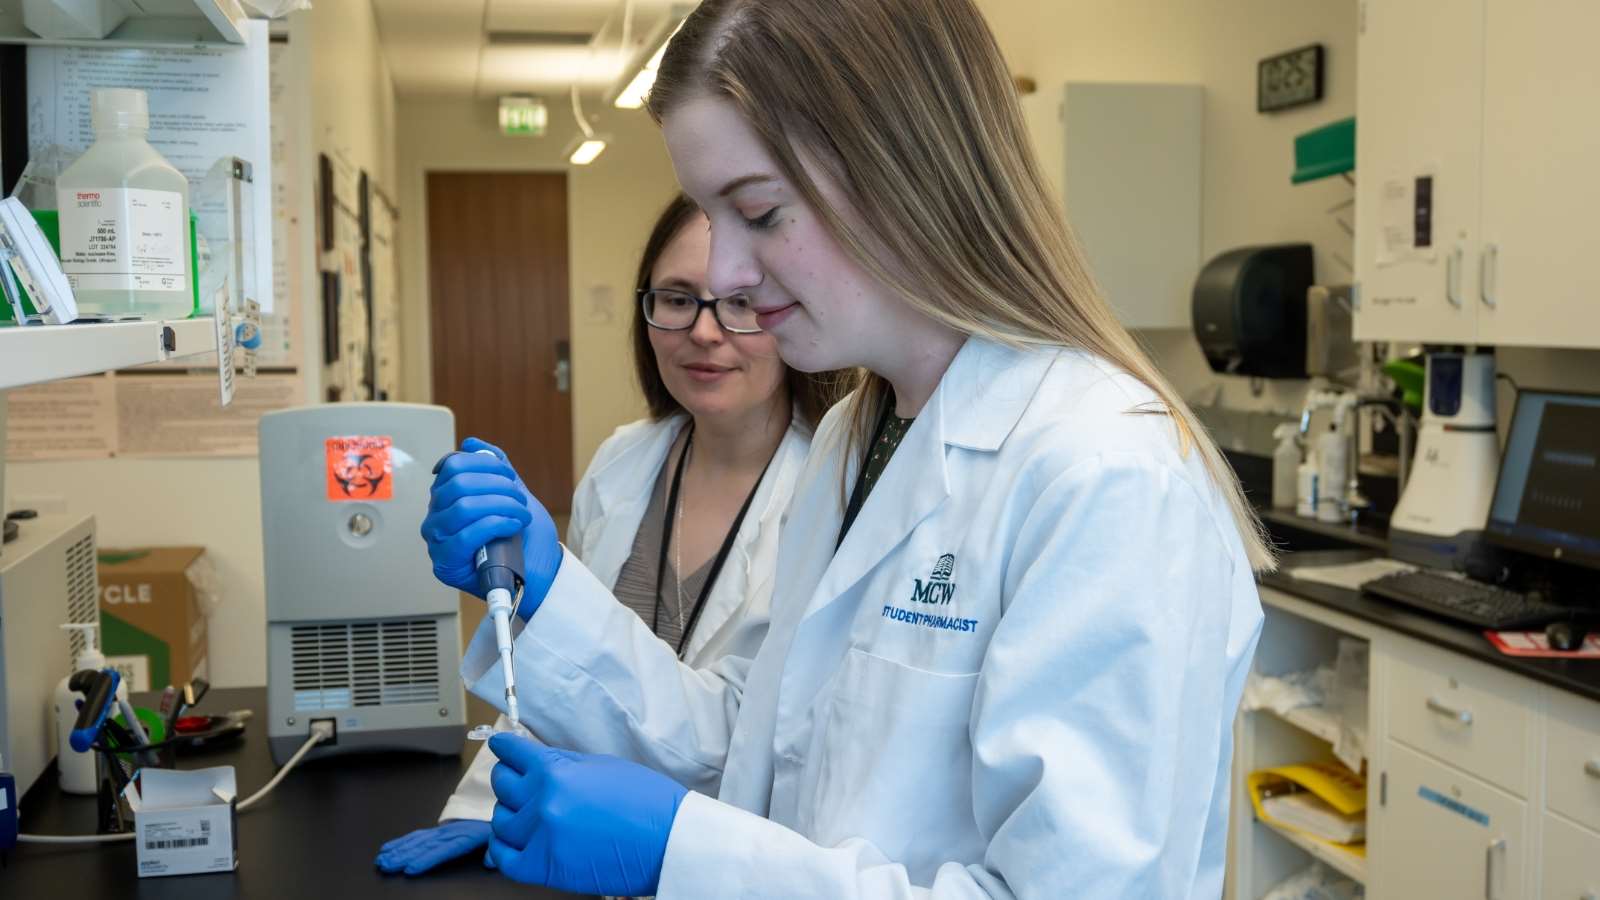 Pharmacy student works in a laboratory setting alongside her preceptor.